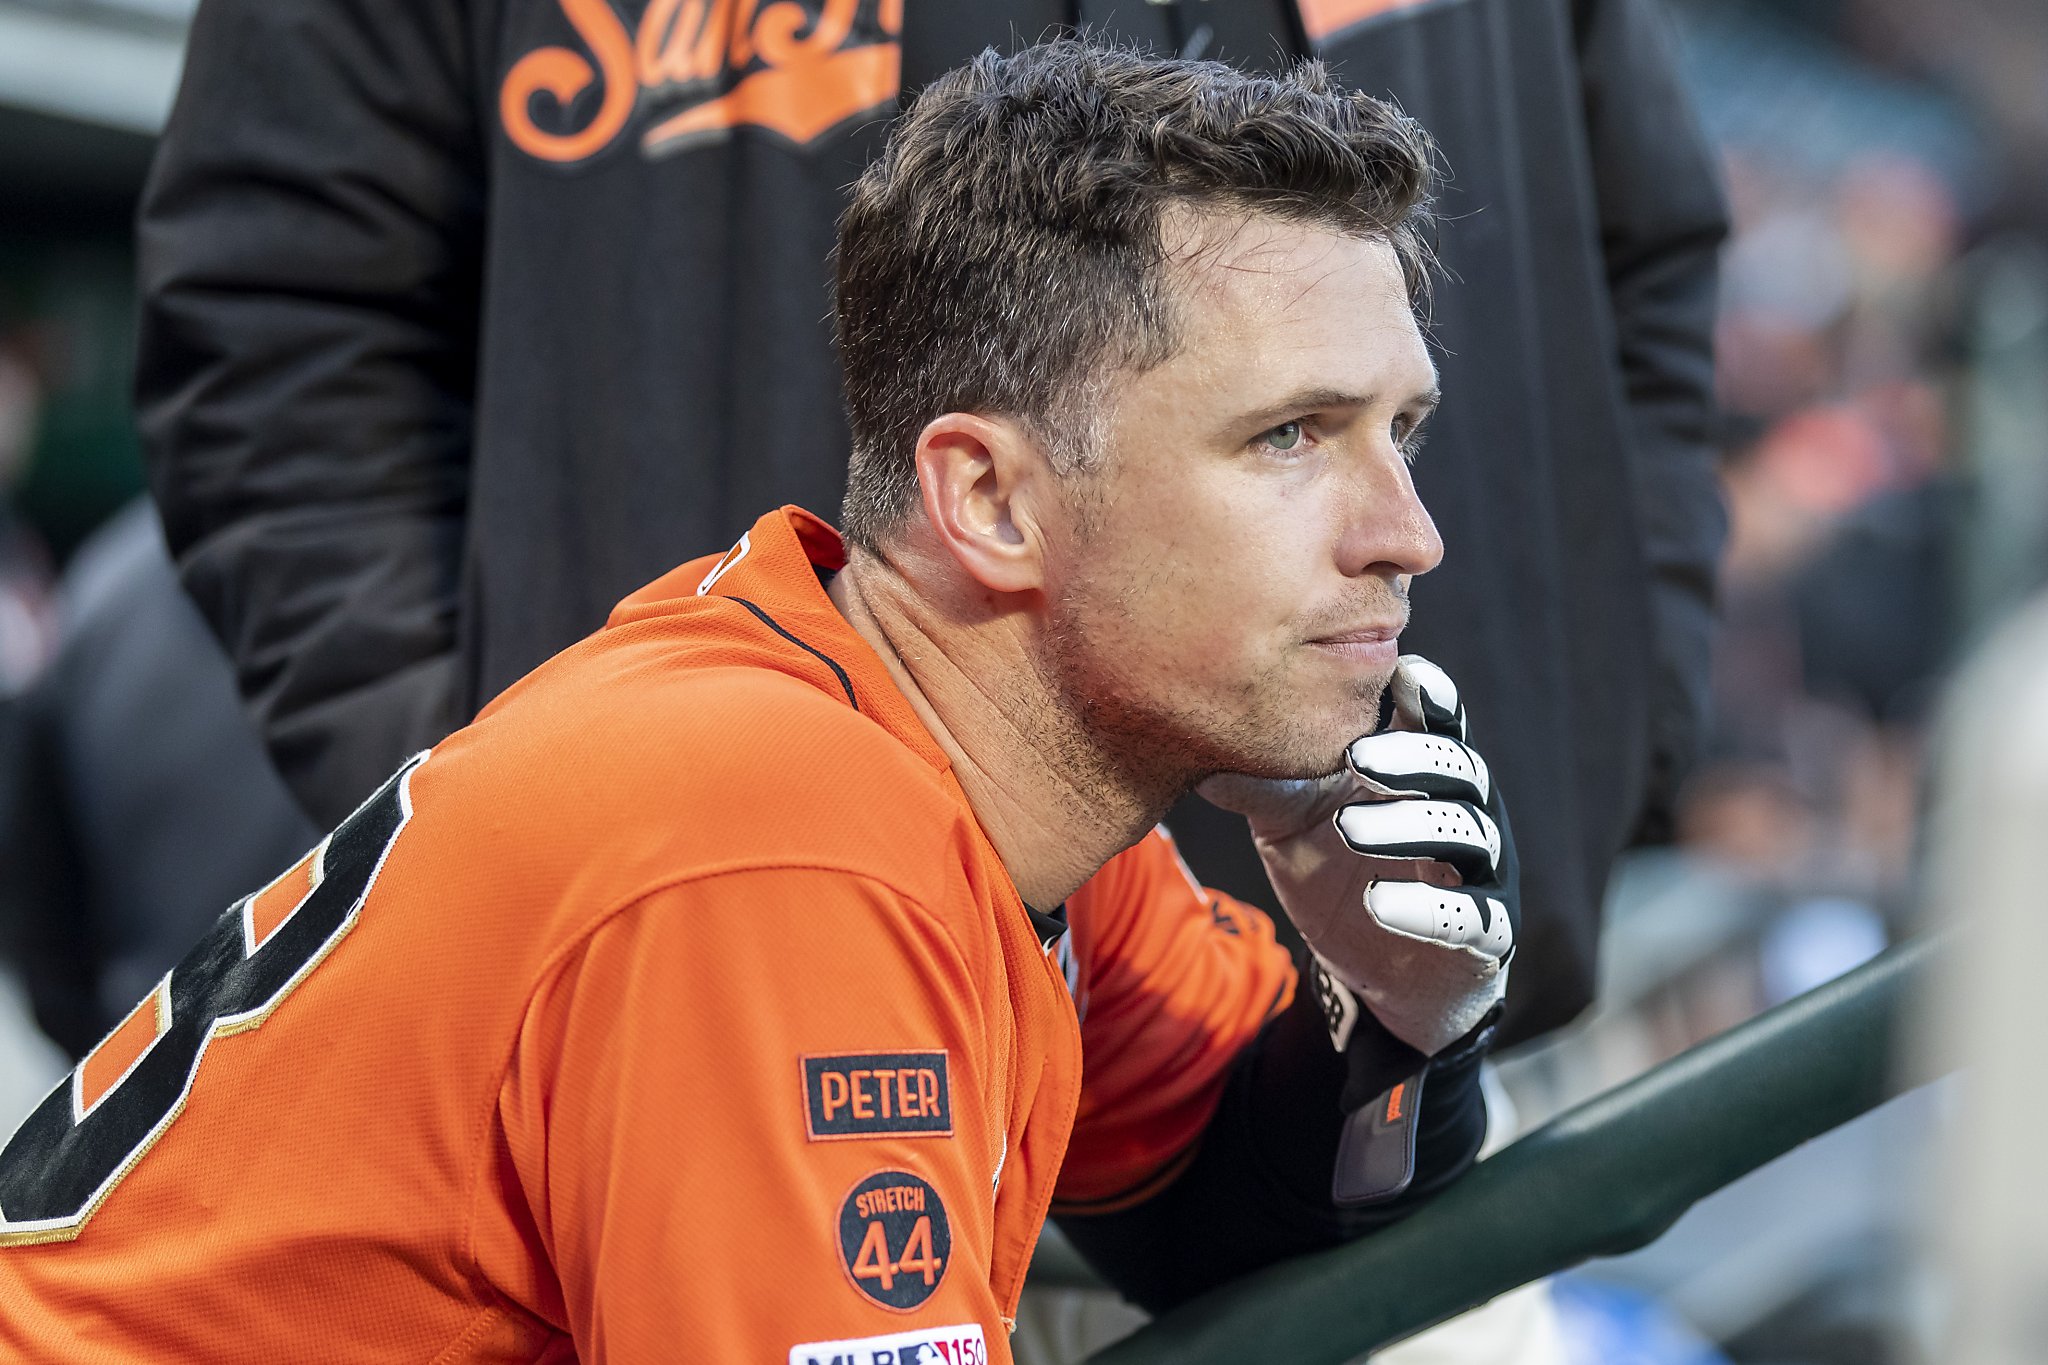 Buster Posey retirement: Giants' options for catcher in 2022